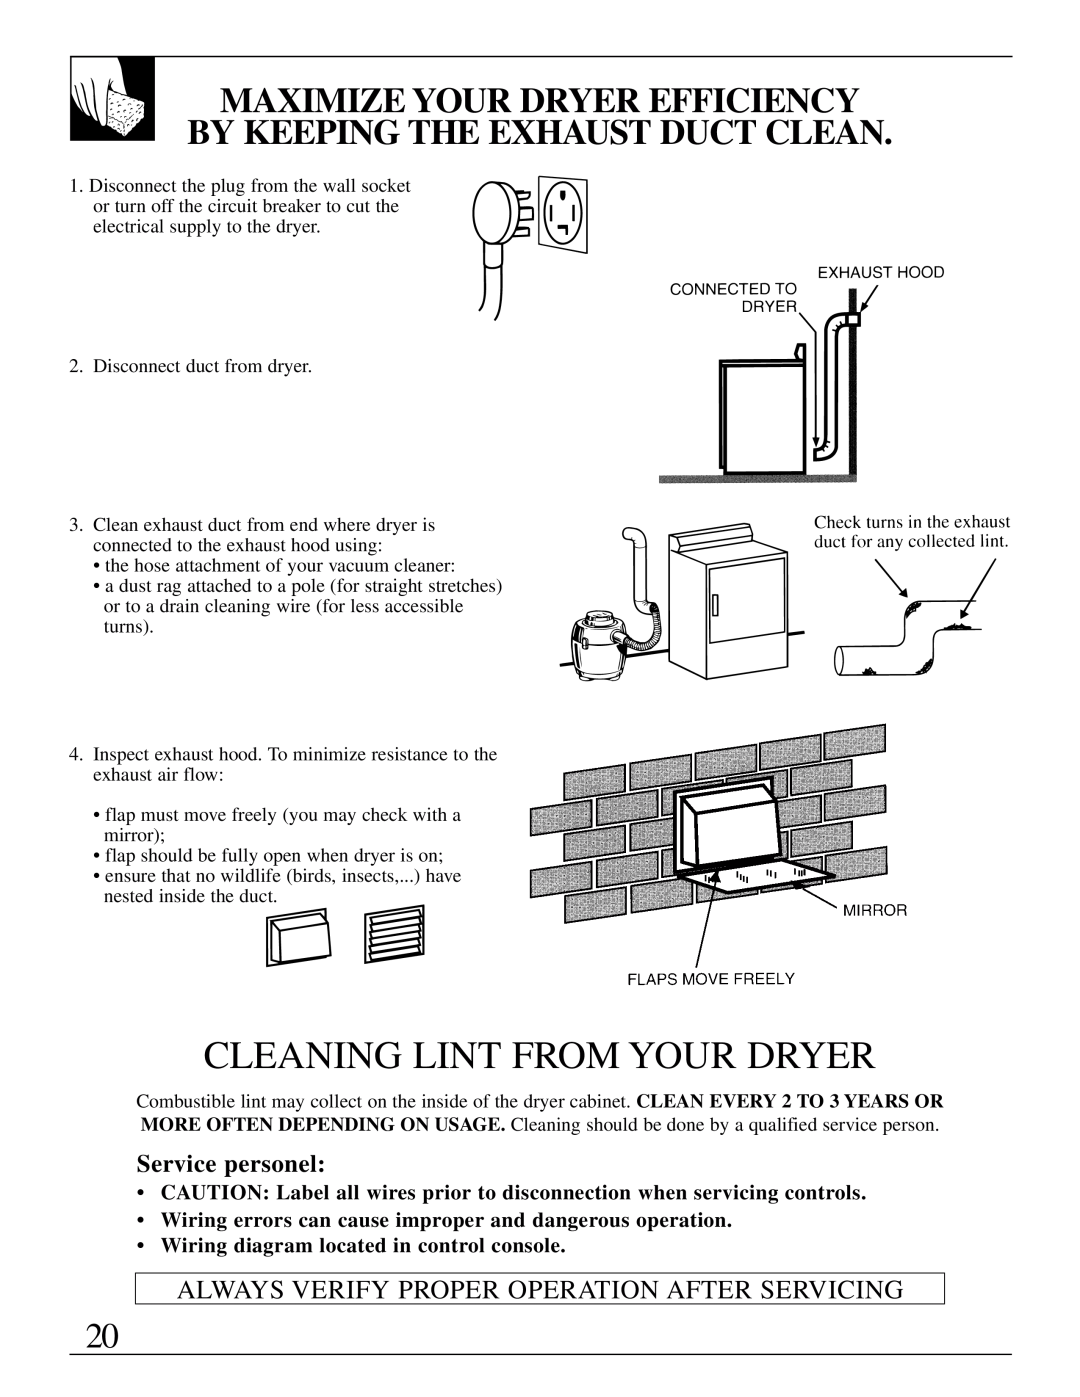 GE 500A280P013 operating instructions Maximize Your Dryer Efficiency By Keeping The Exhaust Duct Clean, Service personel 